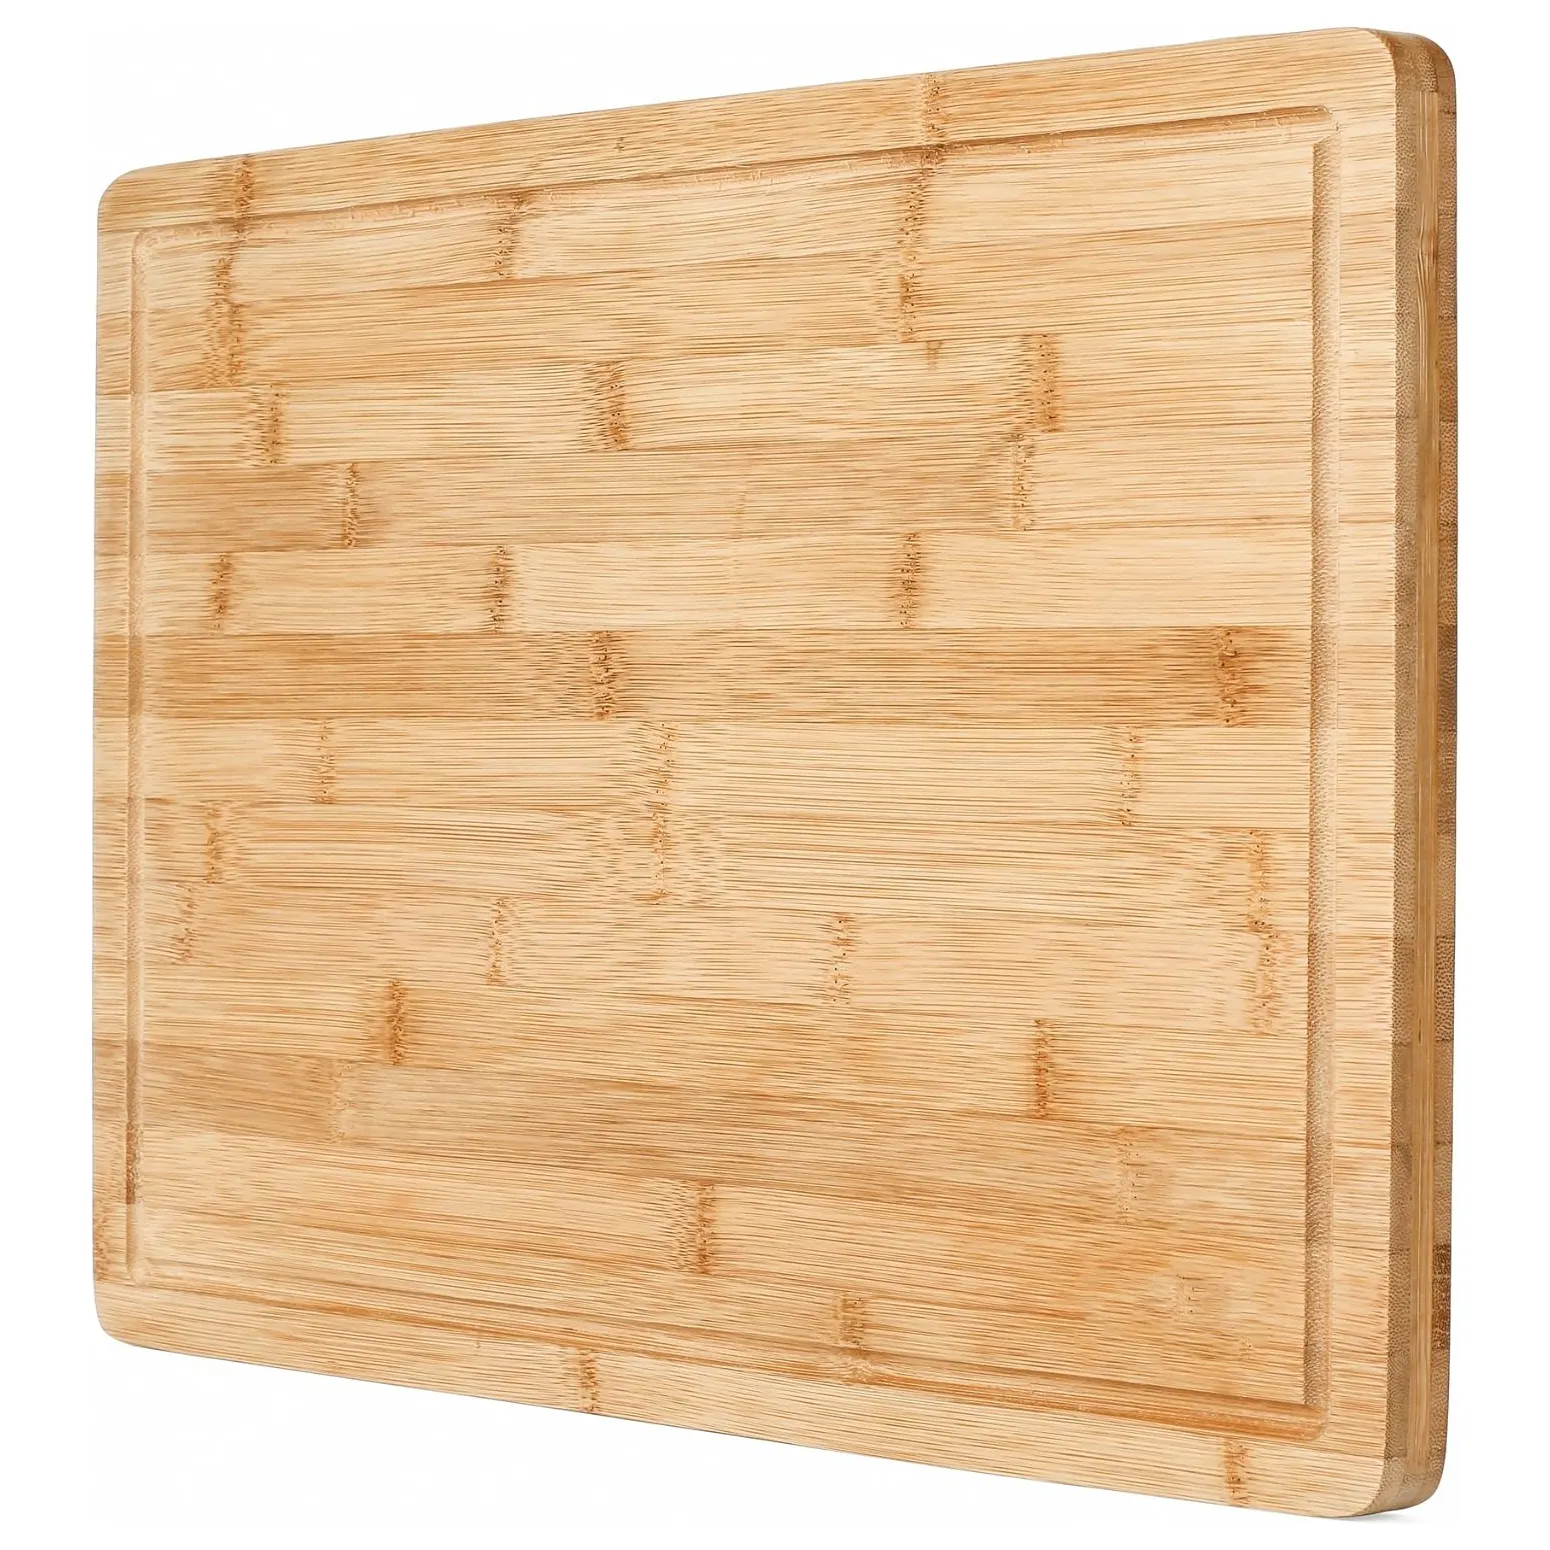 Premium Organic Bamboob Extra Large Chopping Board Butcher Block Bread Cutting Boards With Juicy Groove